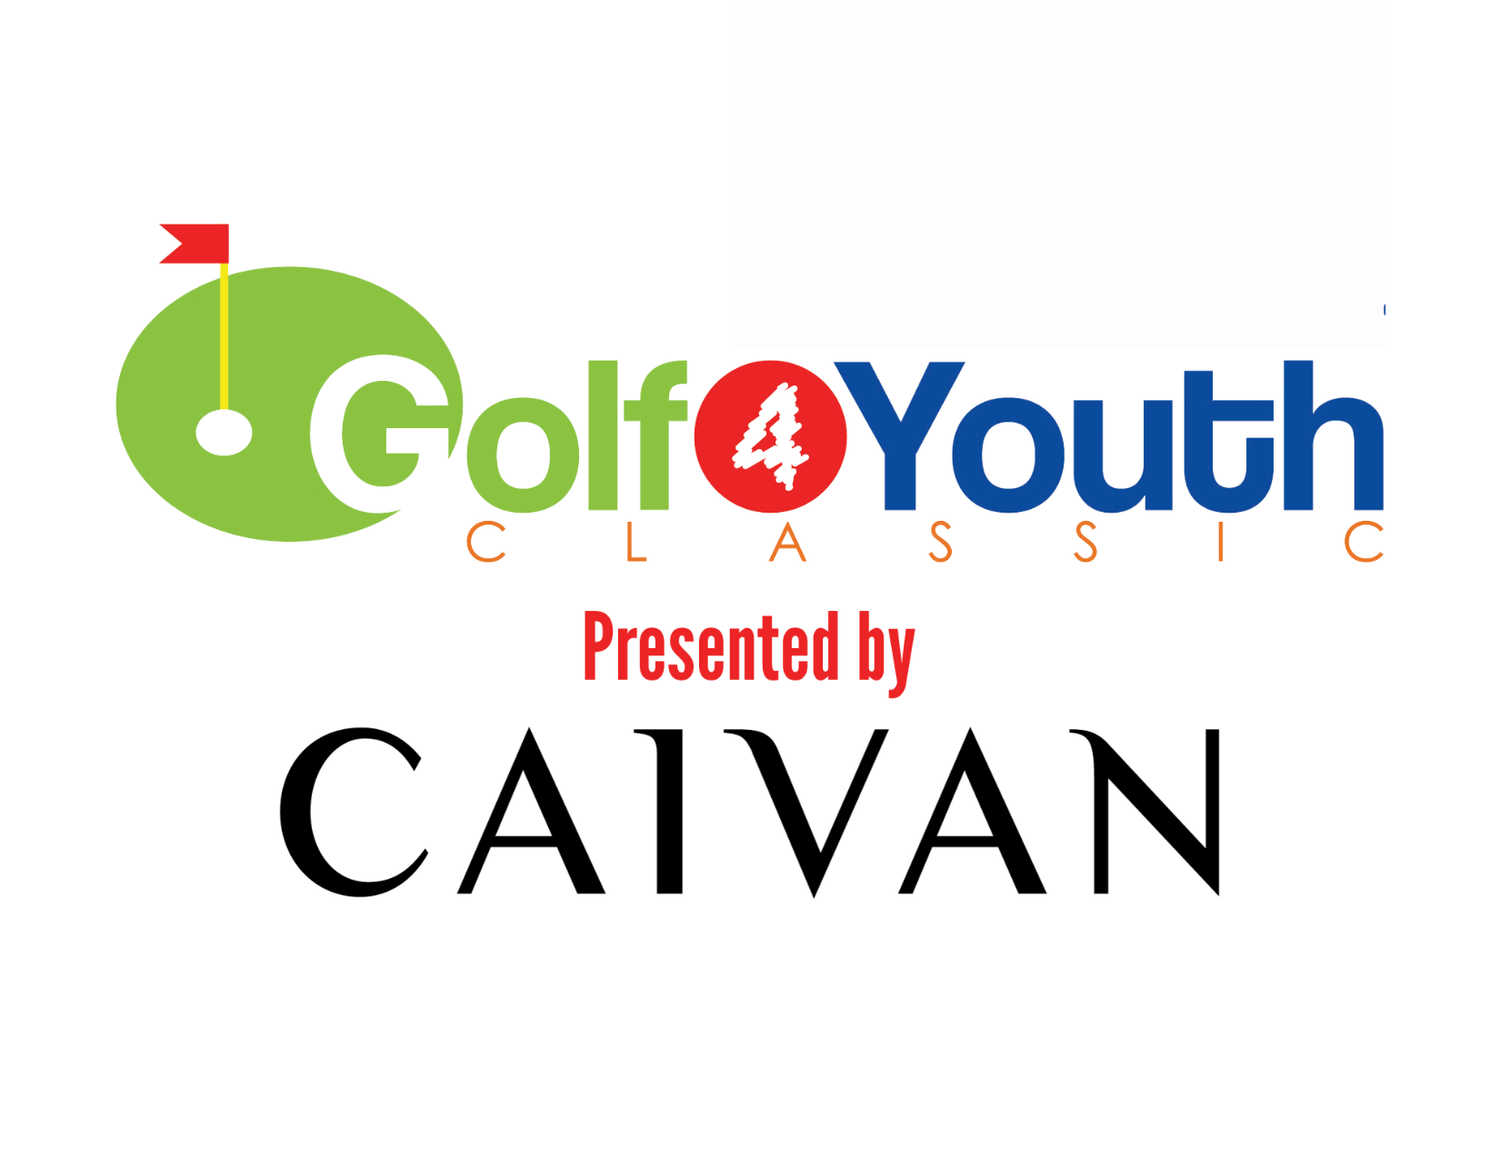 Golf4Youth Classic